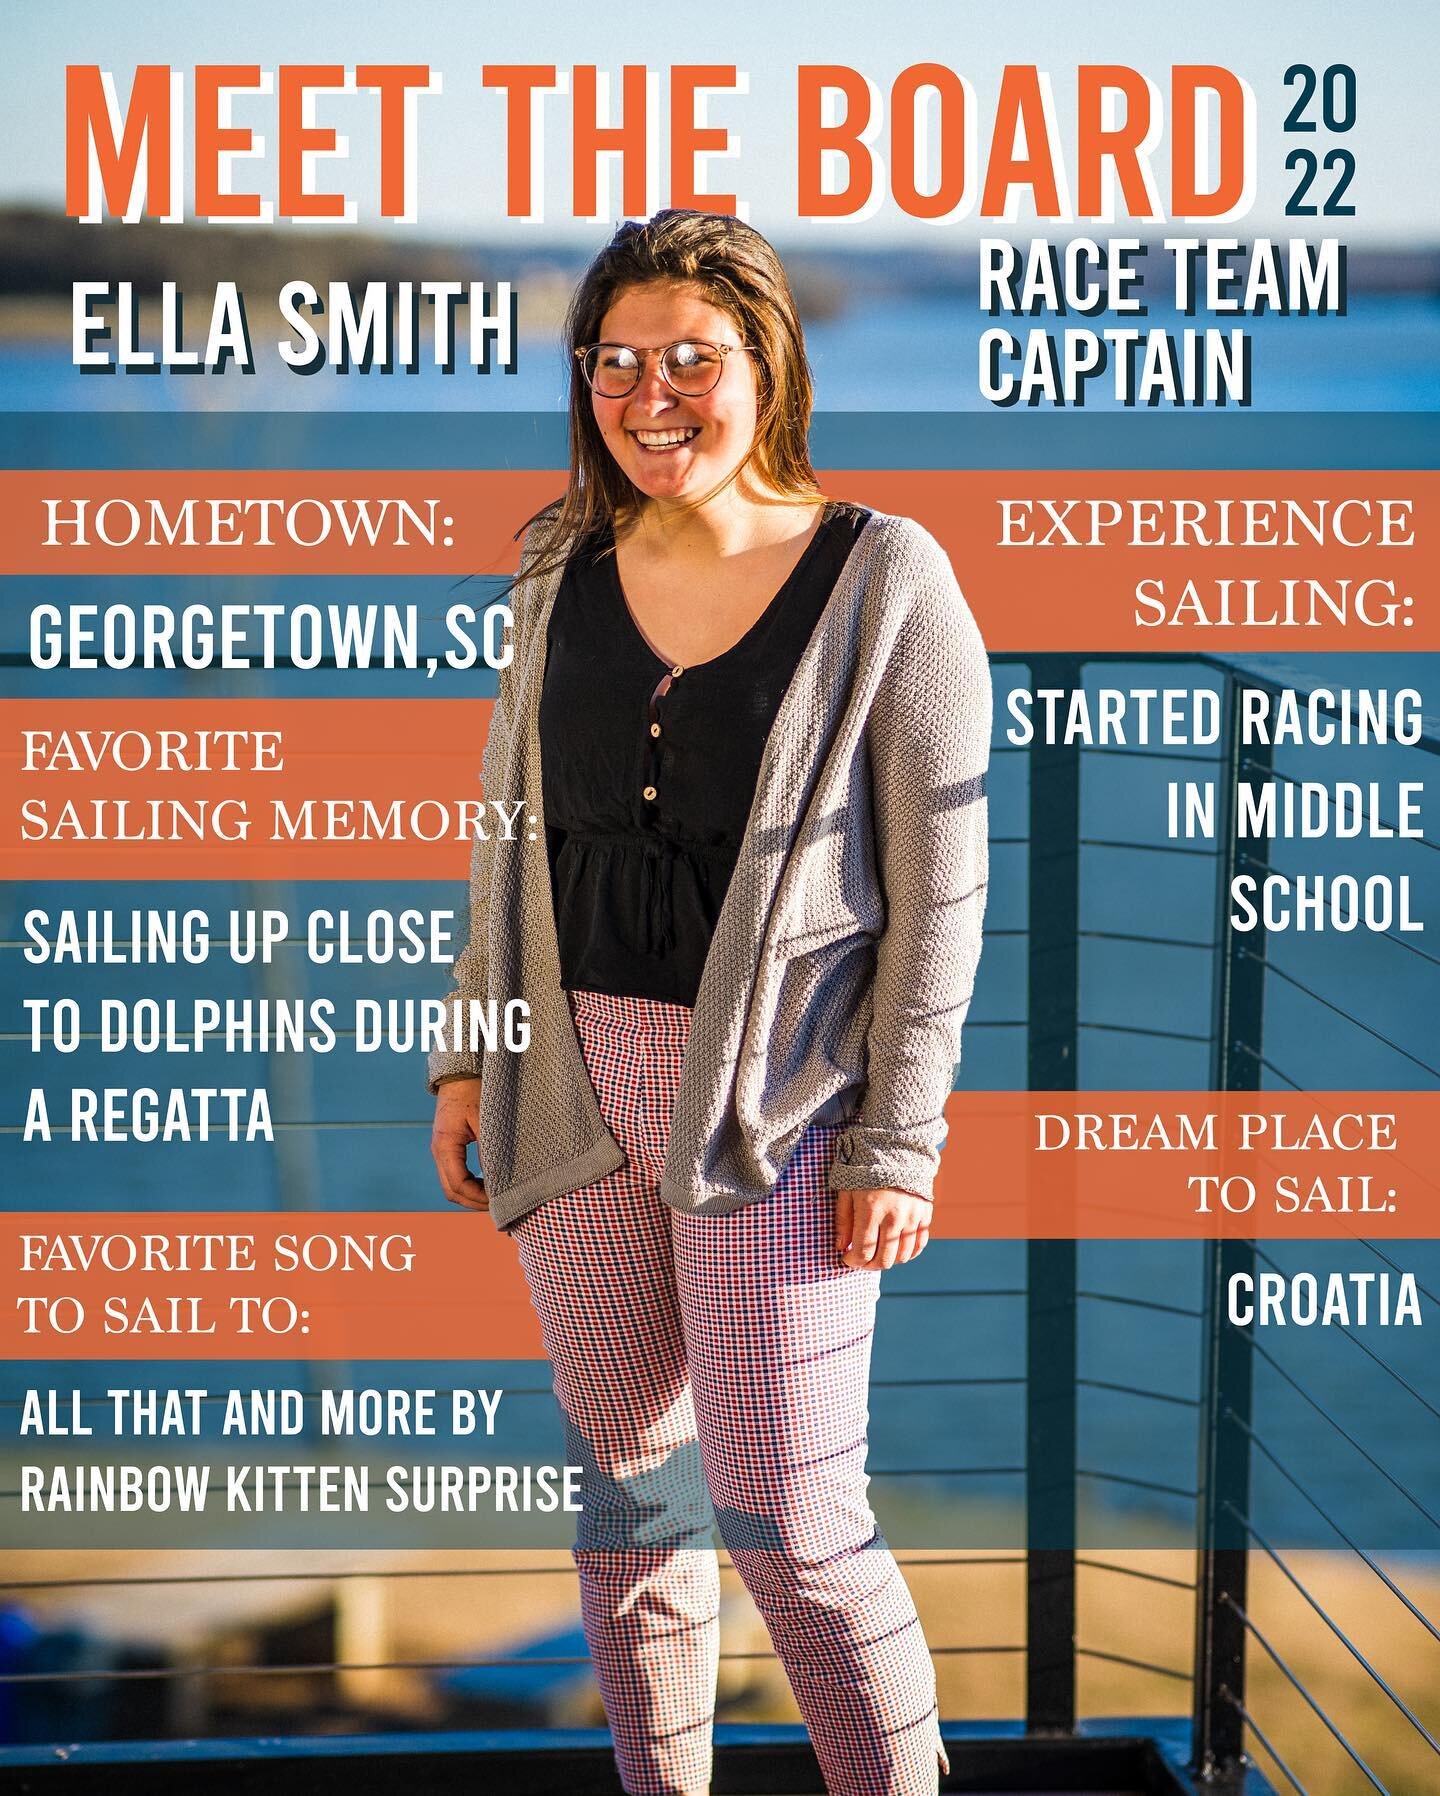 ⛵️☀️MEET THE BOARD ☀️⛵️

Meet our sailing Executive Officers! 
Meet our Race Team Captain EXCELLENT Ella Smith 🏆☺️ Ella makes sure our race team is in tip top shape and ready to compete in regattas! Her hard work has made Clemson Sailing a fierce co